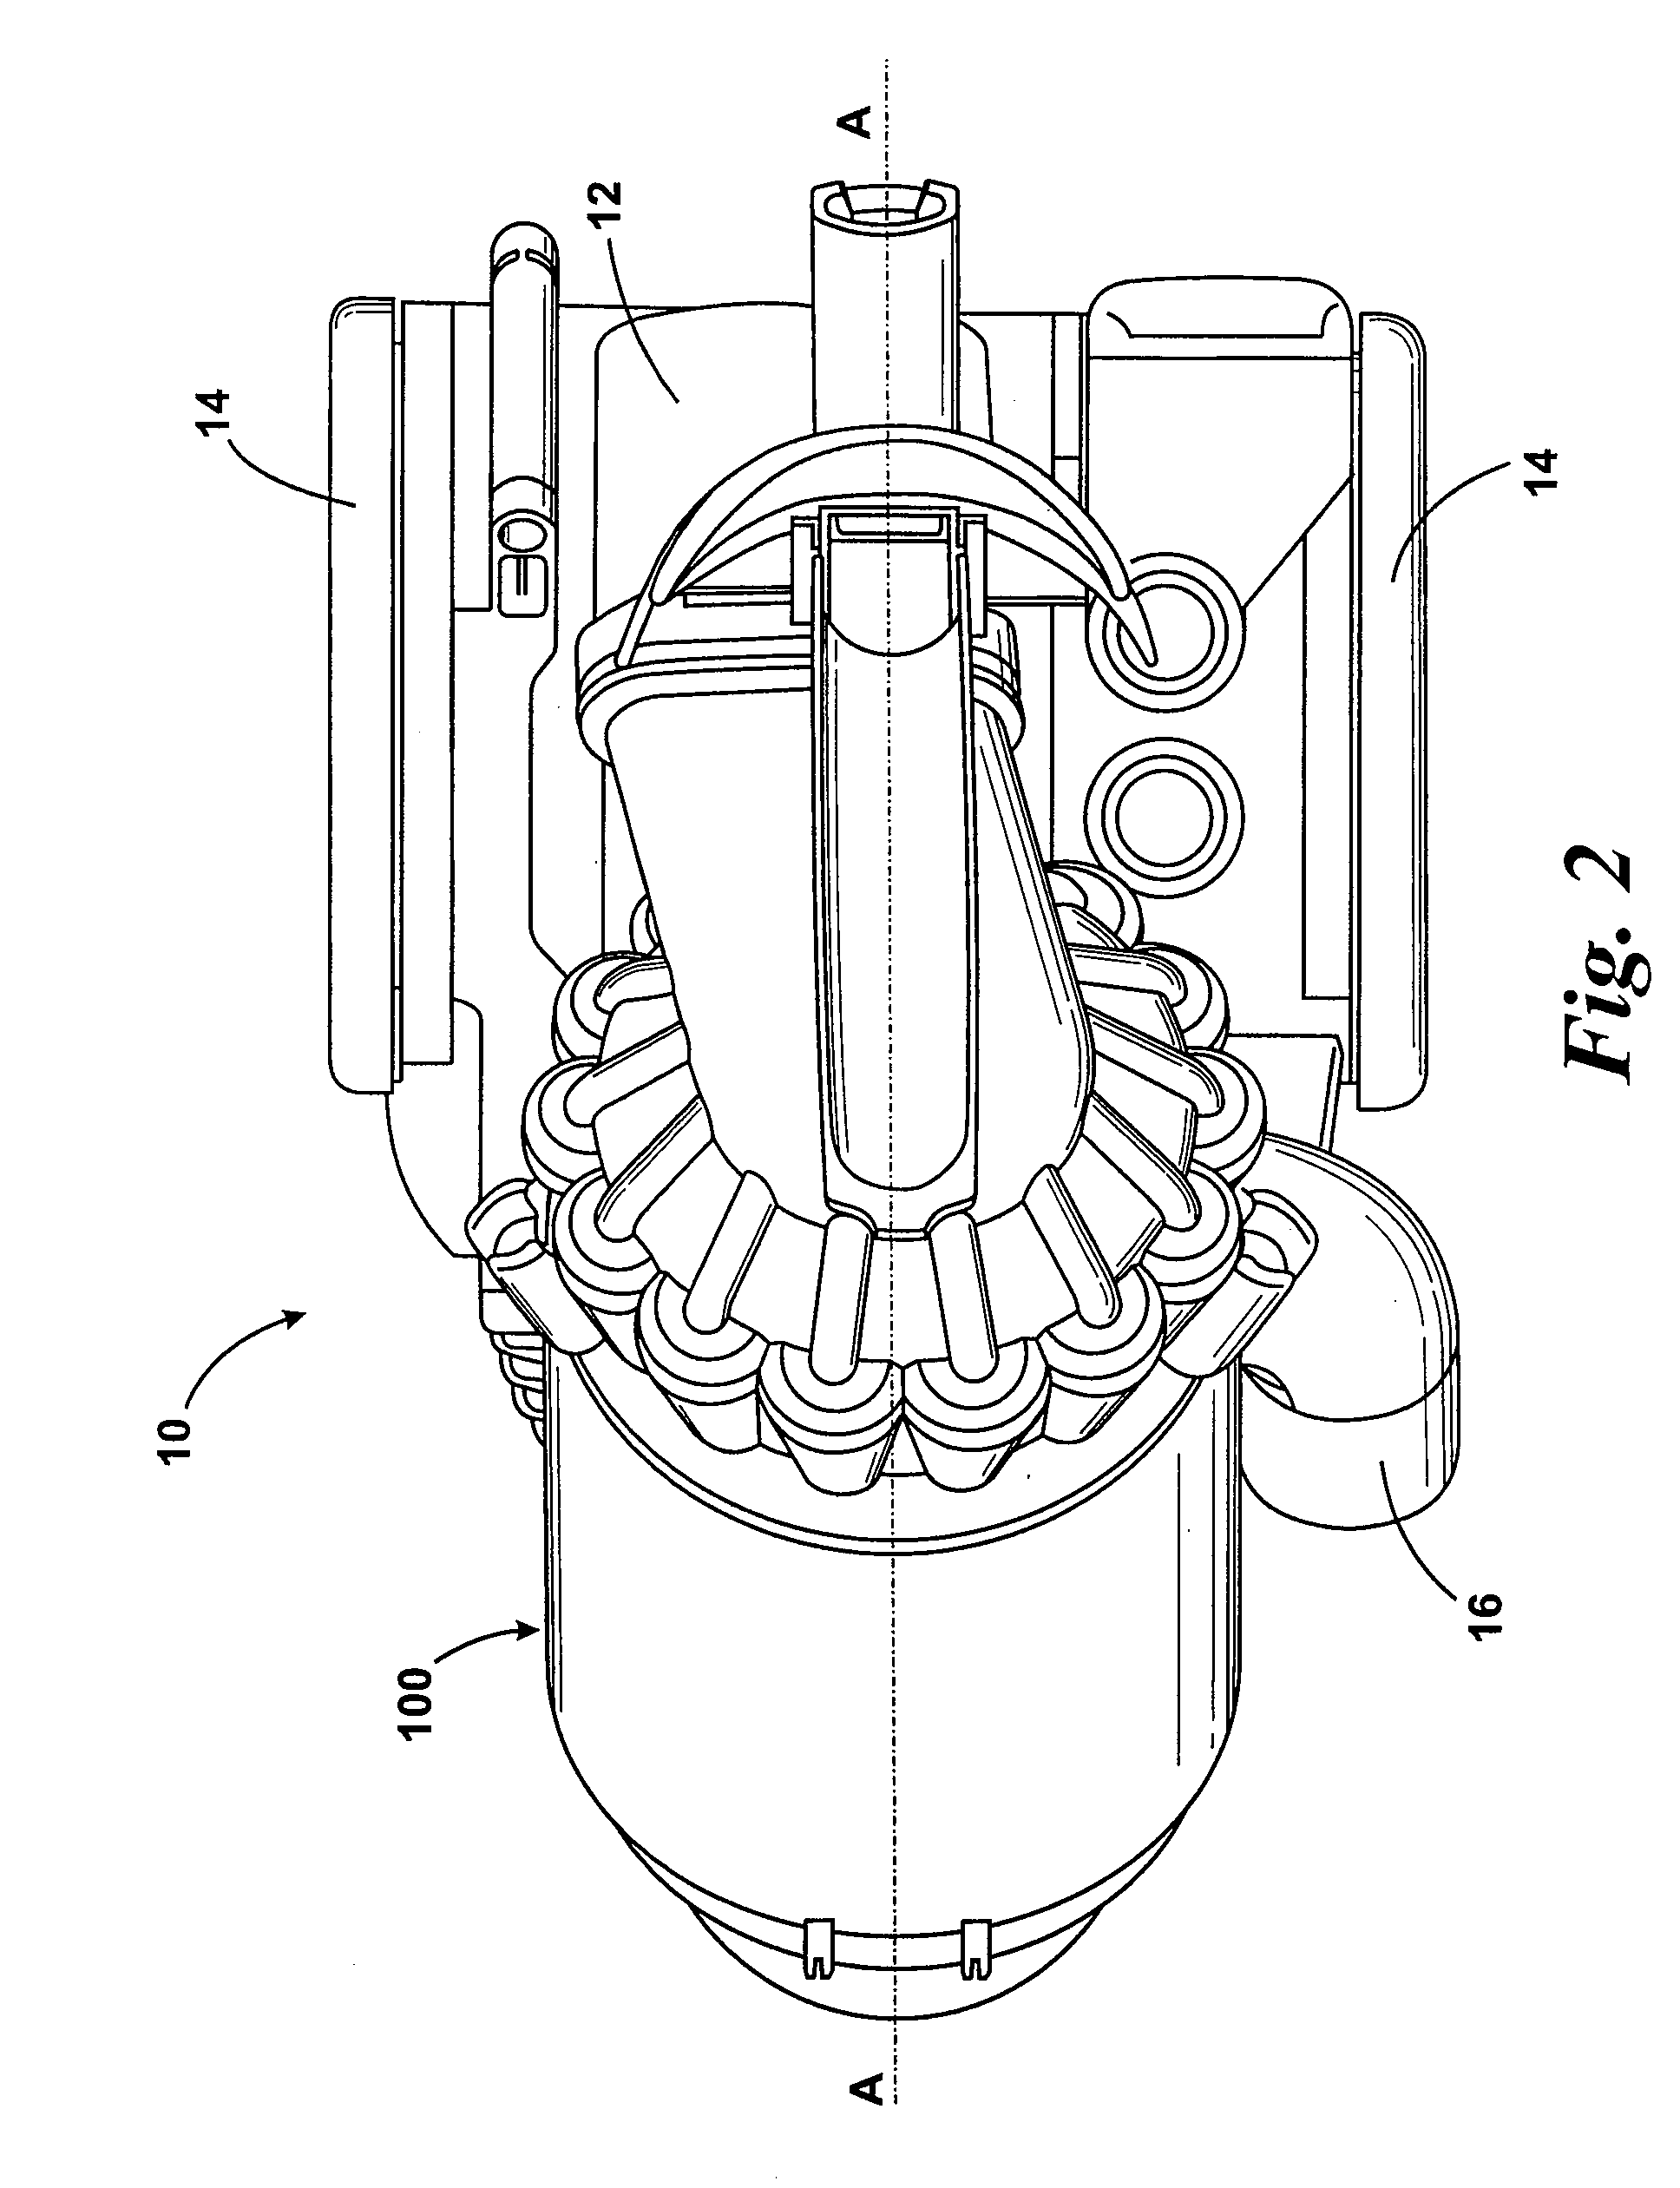 Cyclonic separating apparatus for a cleaning appliance